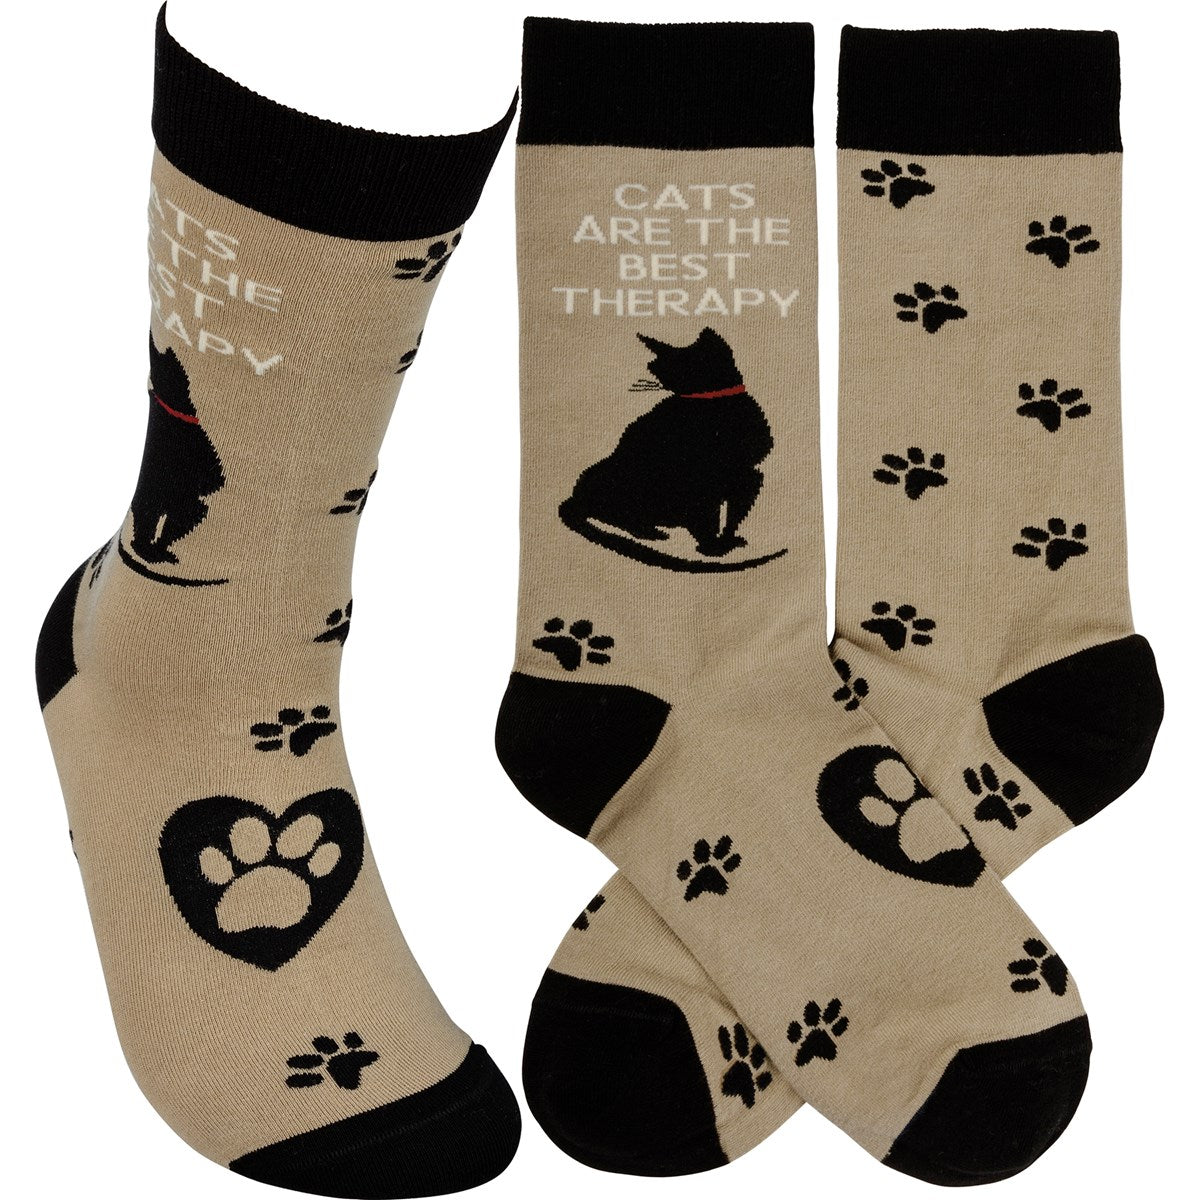 . Cats are the best Therapy Socks